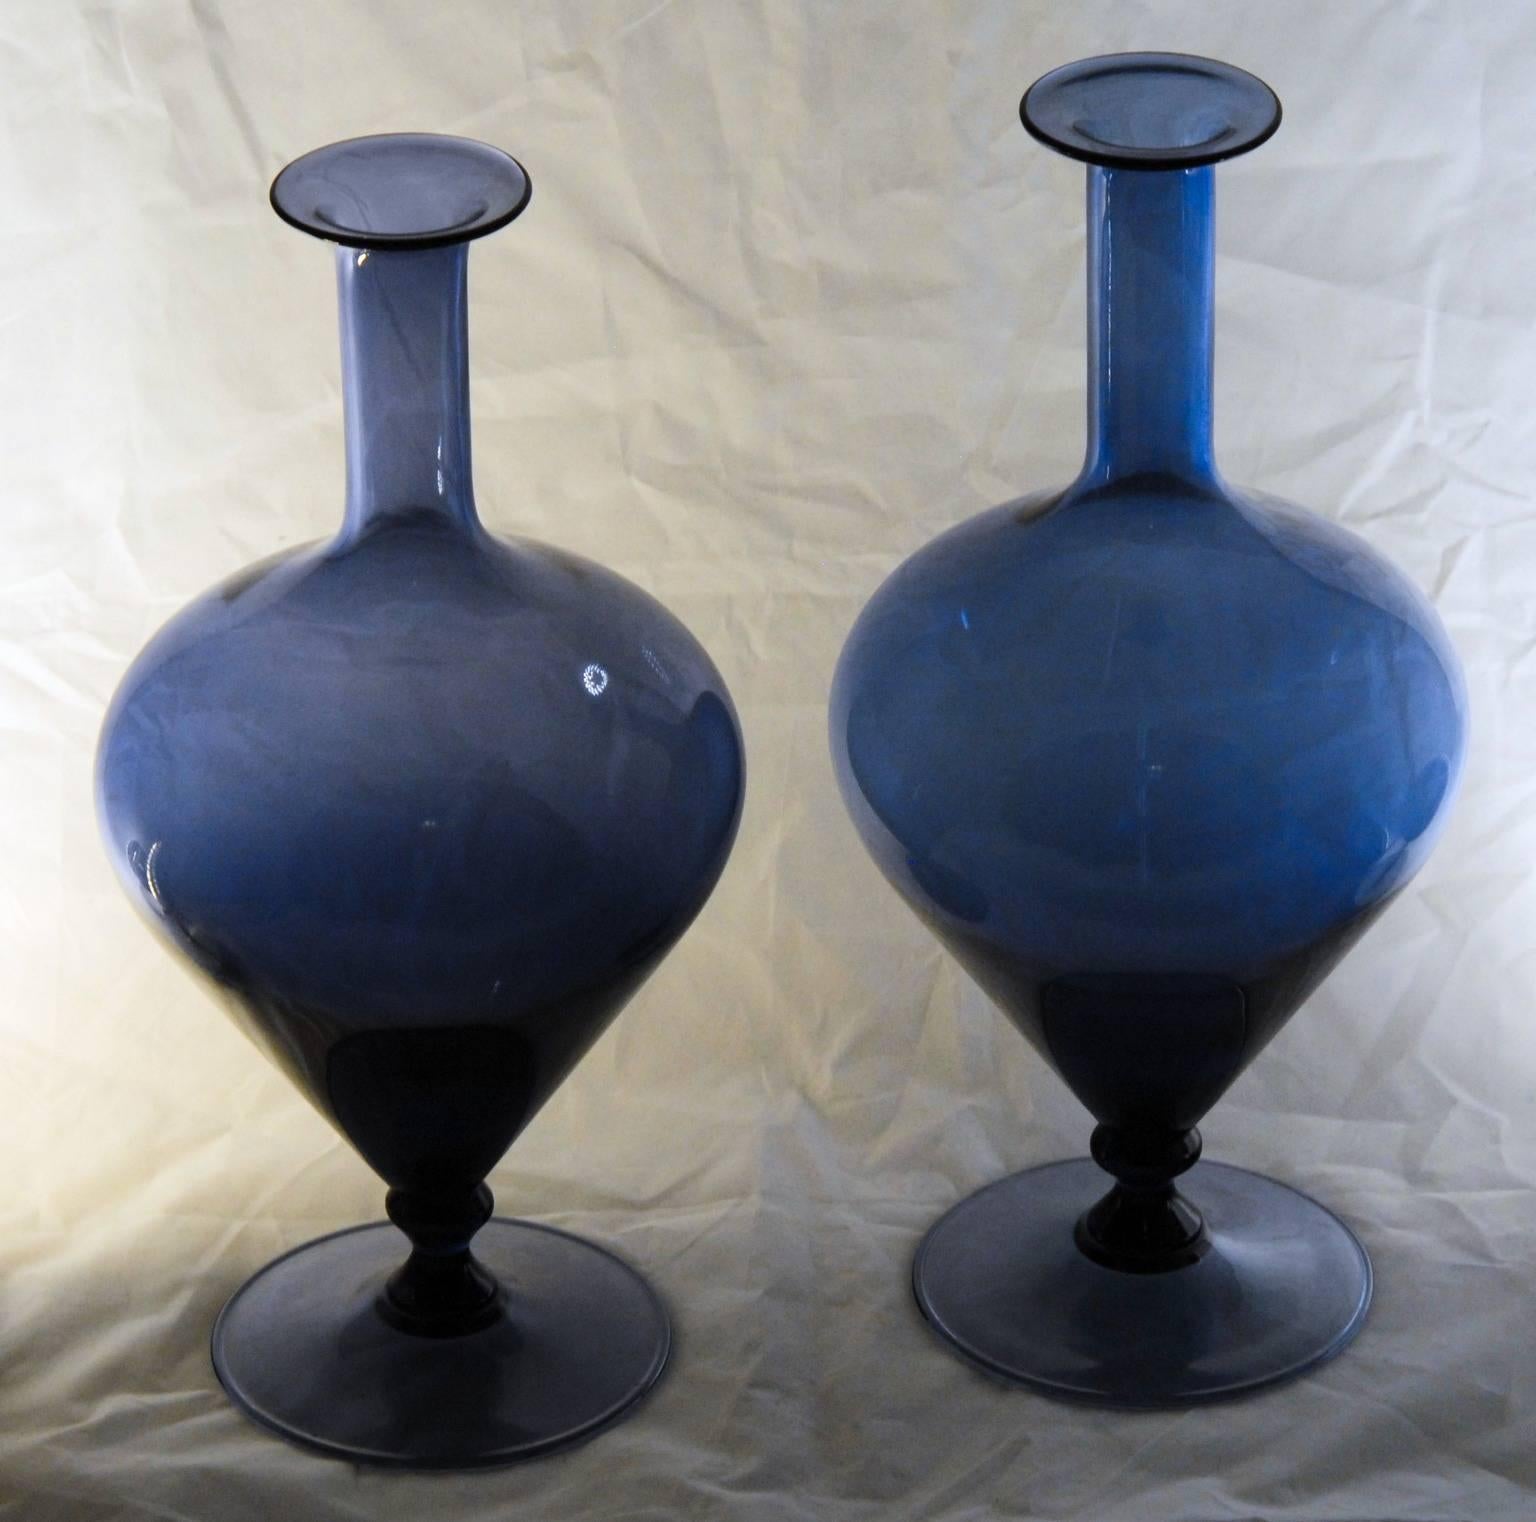 Pair of elegant bluino Tiziano vases from Pauly. Special bluino color, more elegant than the Classic cobalt or aquamarine standard glass colors. Slightly different in height and color but same manufacturing. Might be an earlier production than